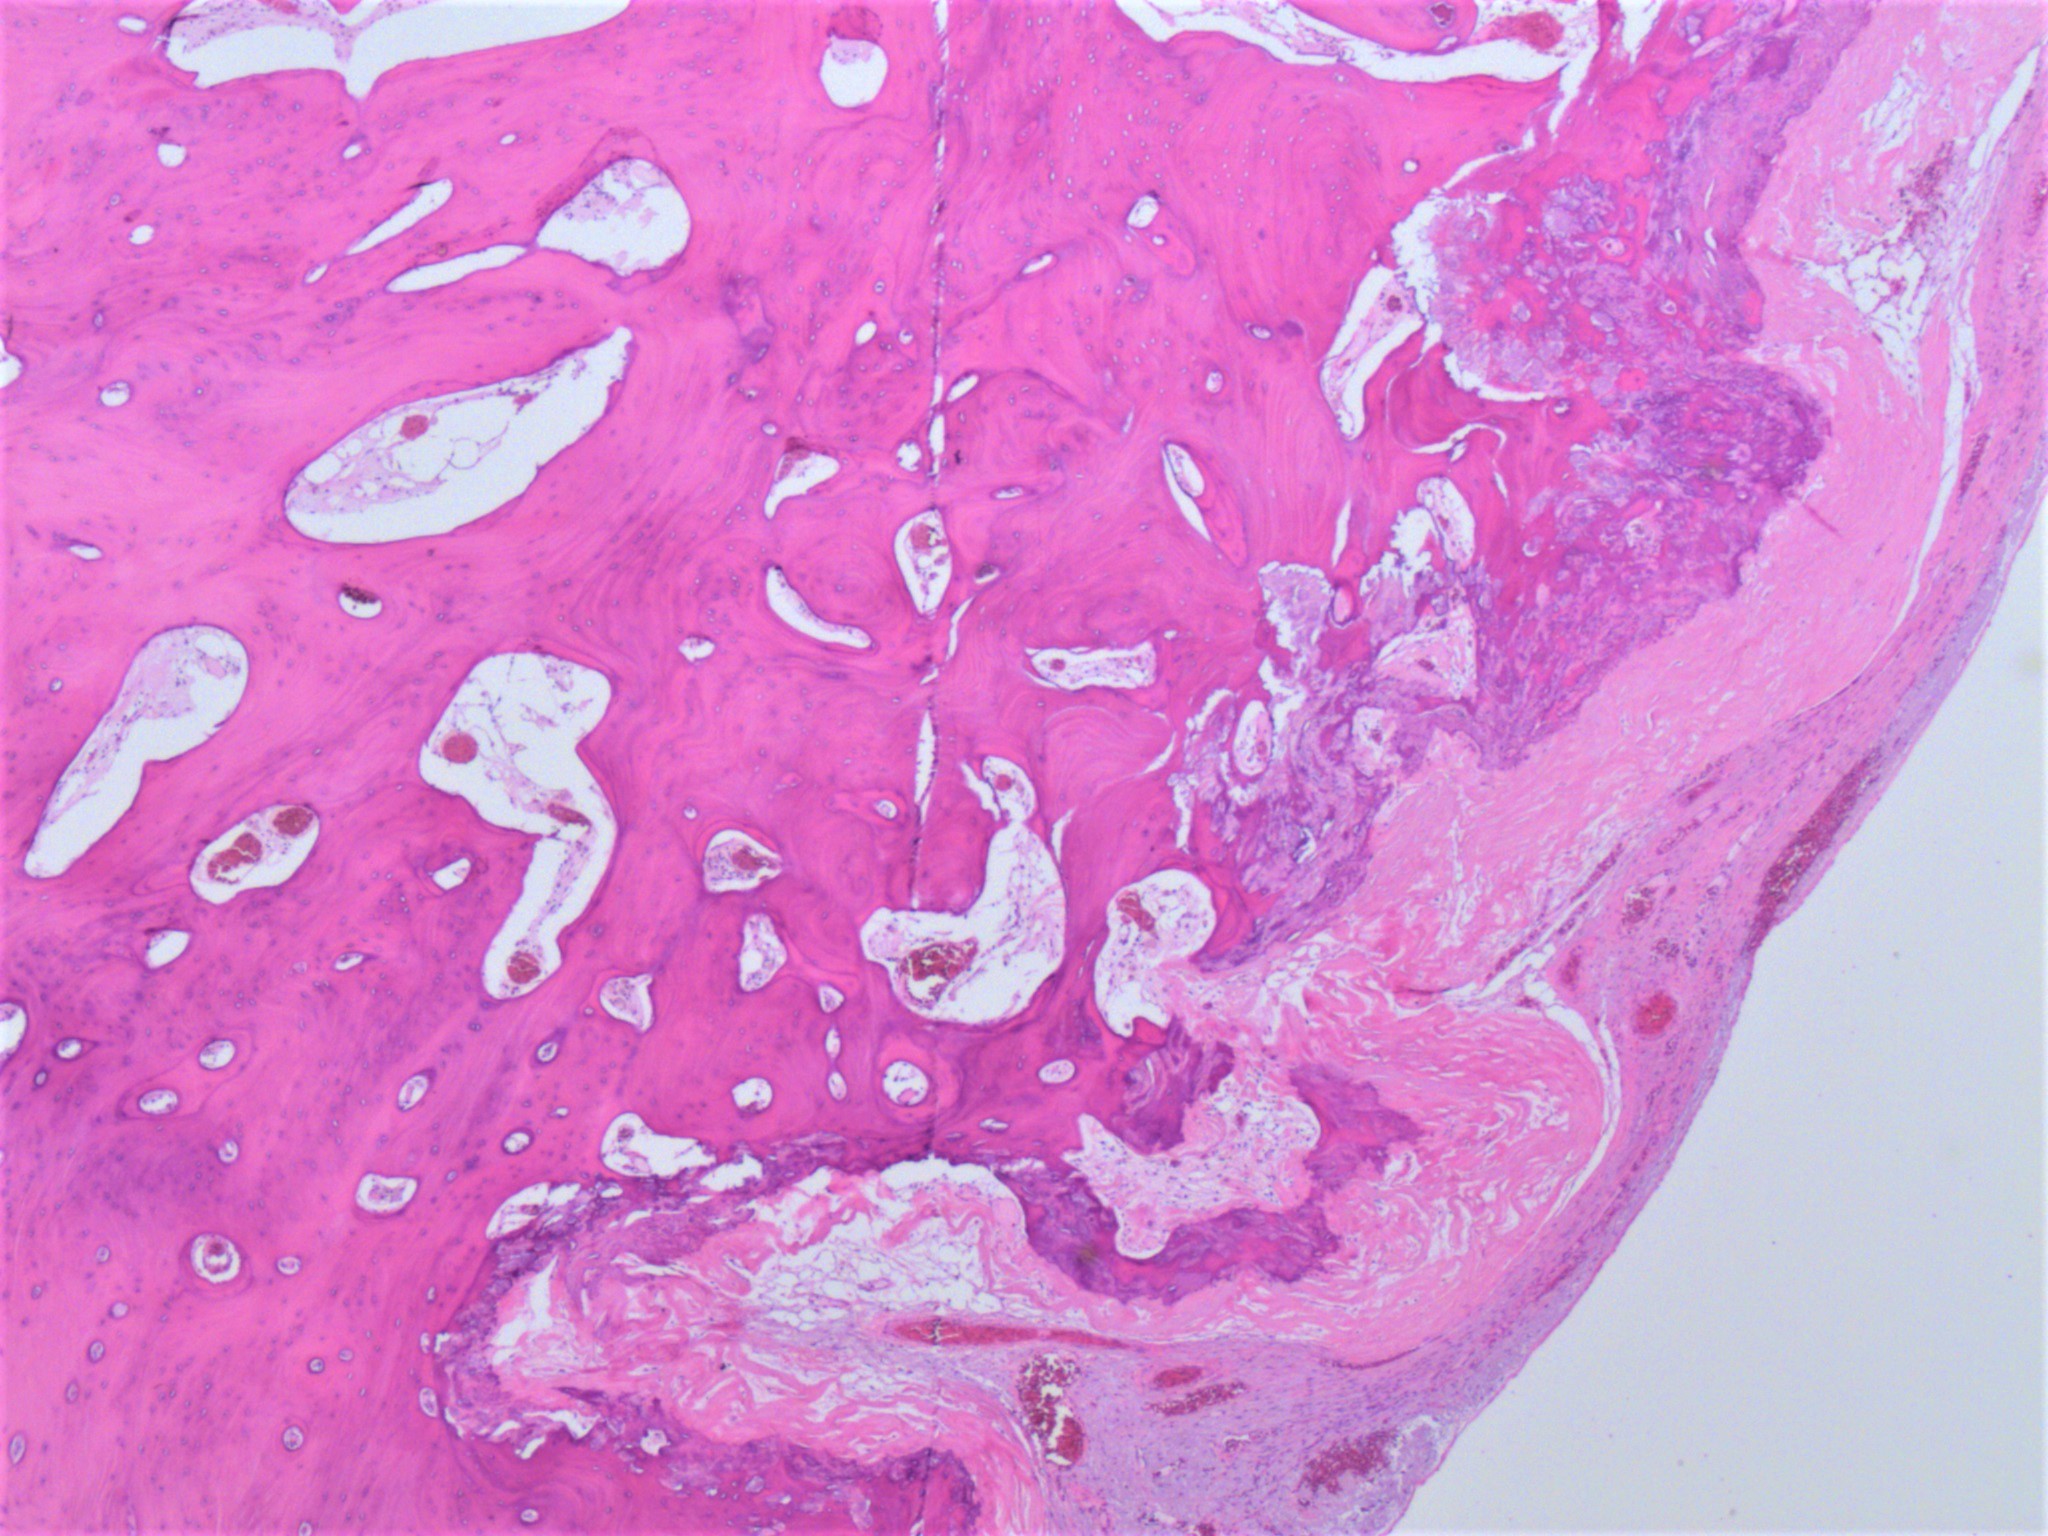 Osseous metaplasia of the ovary